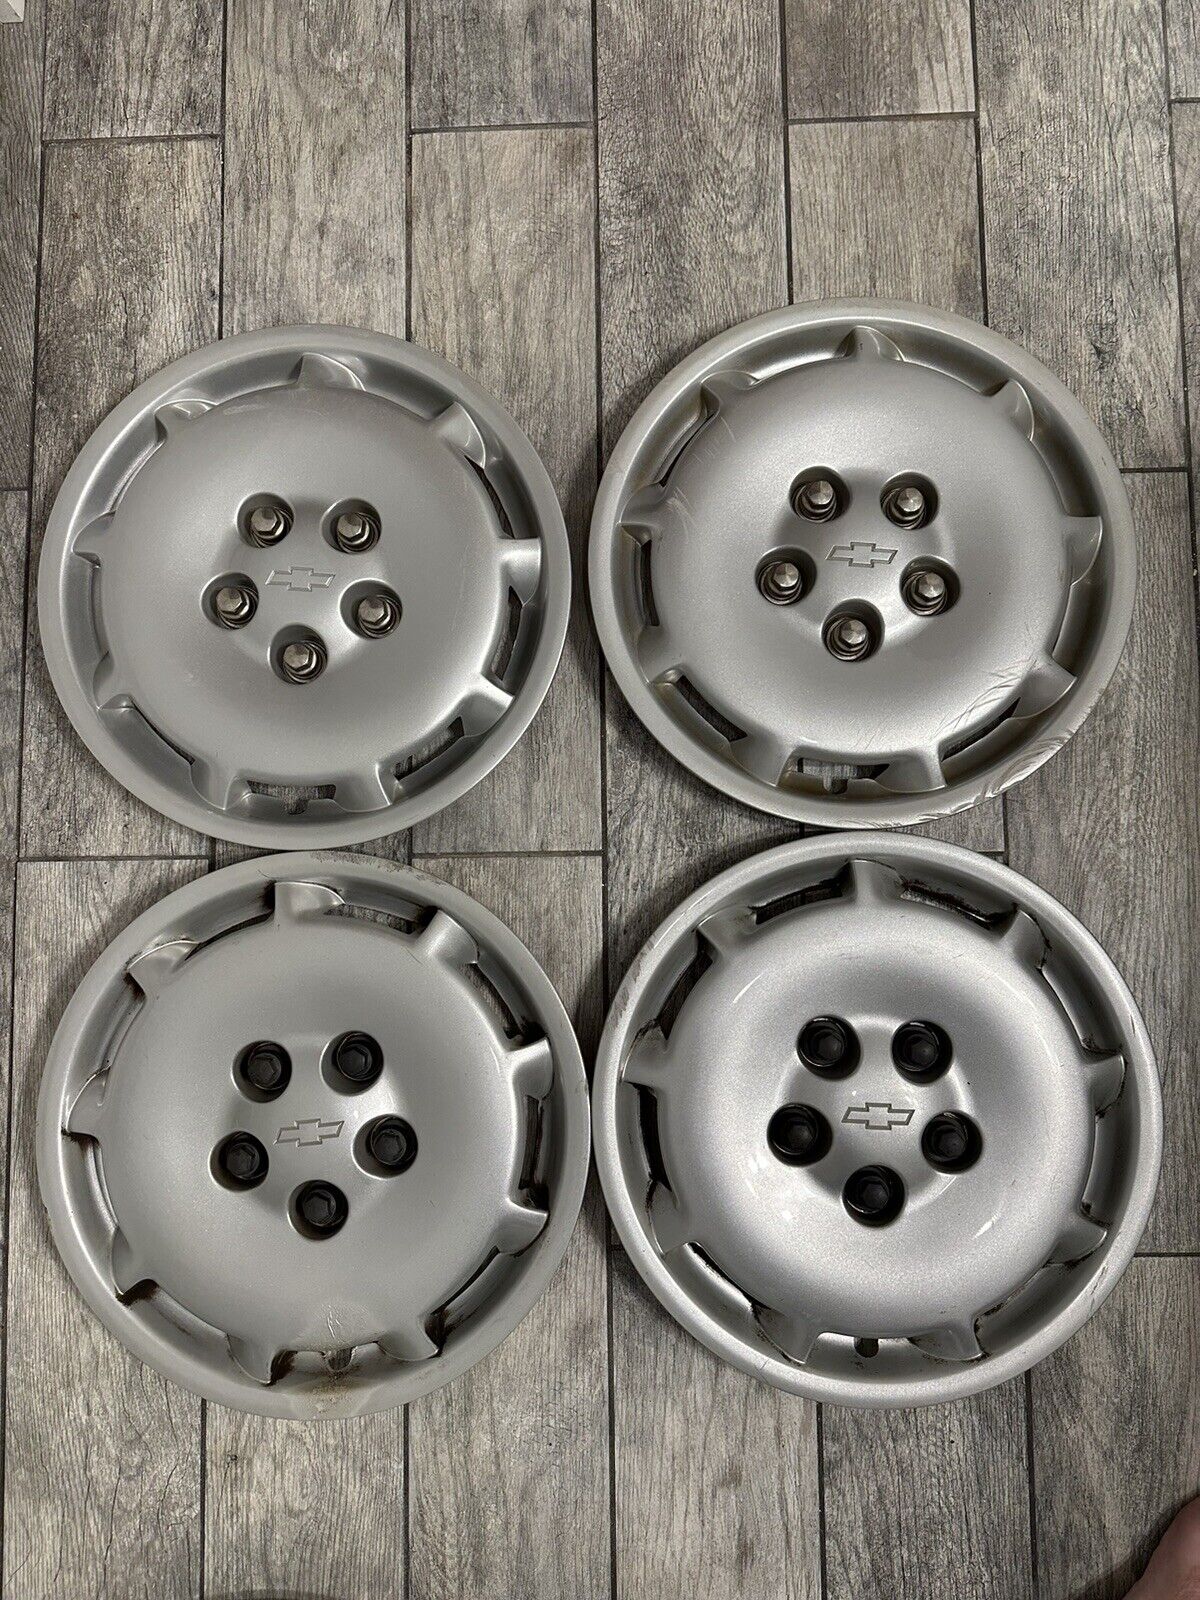 95-99 Chevy Lumina Monte Carlo 15” Bolt On Hubcaps Wheel Covers 10227997